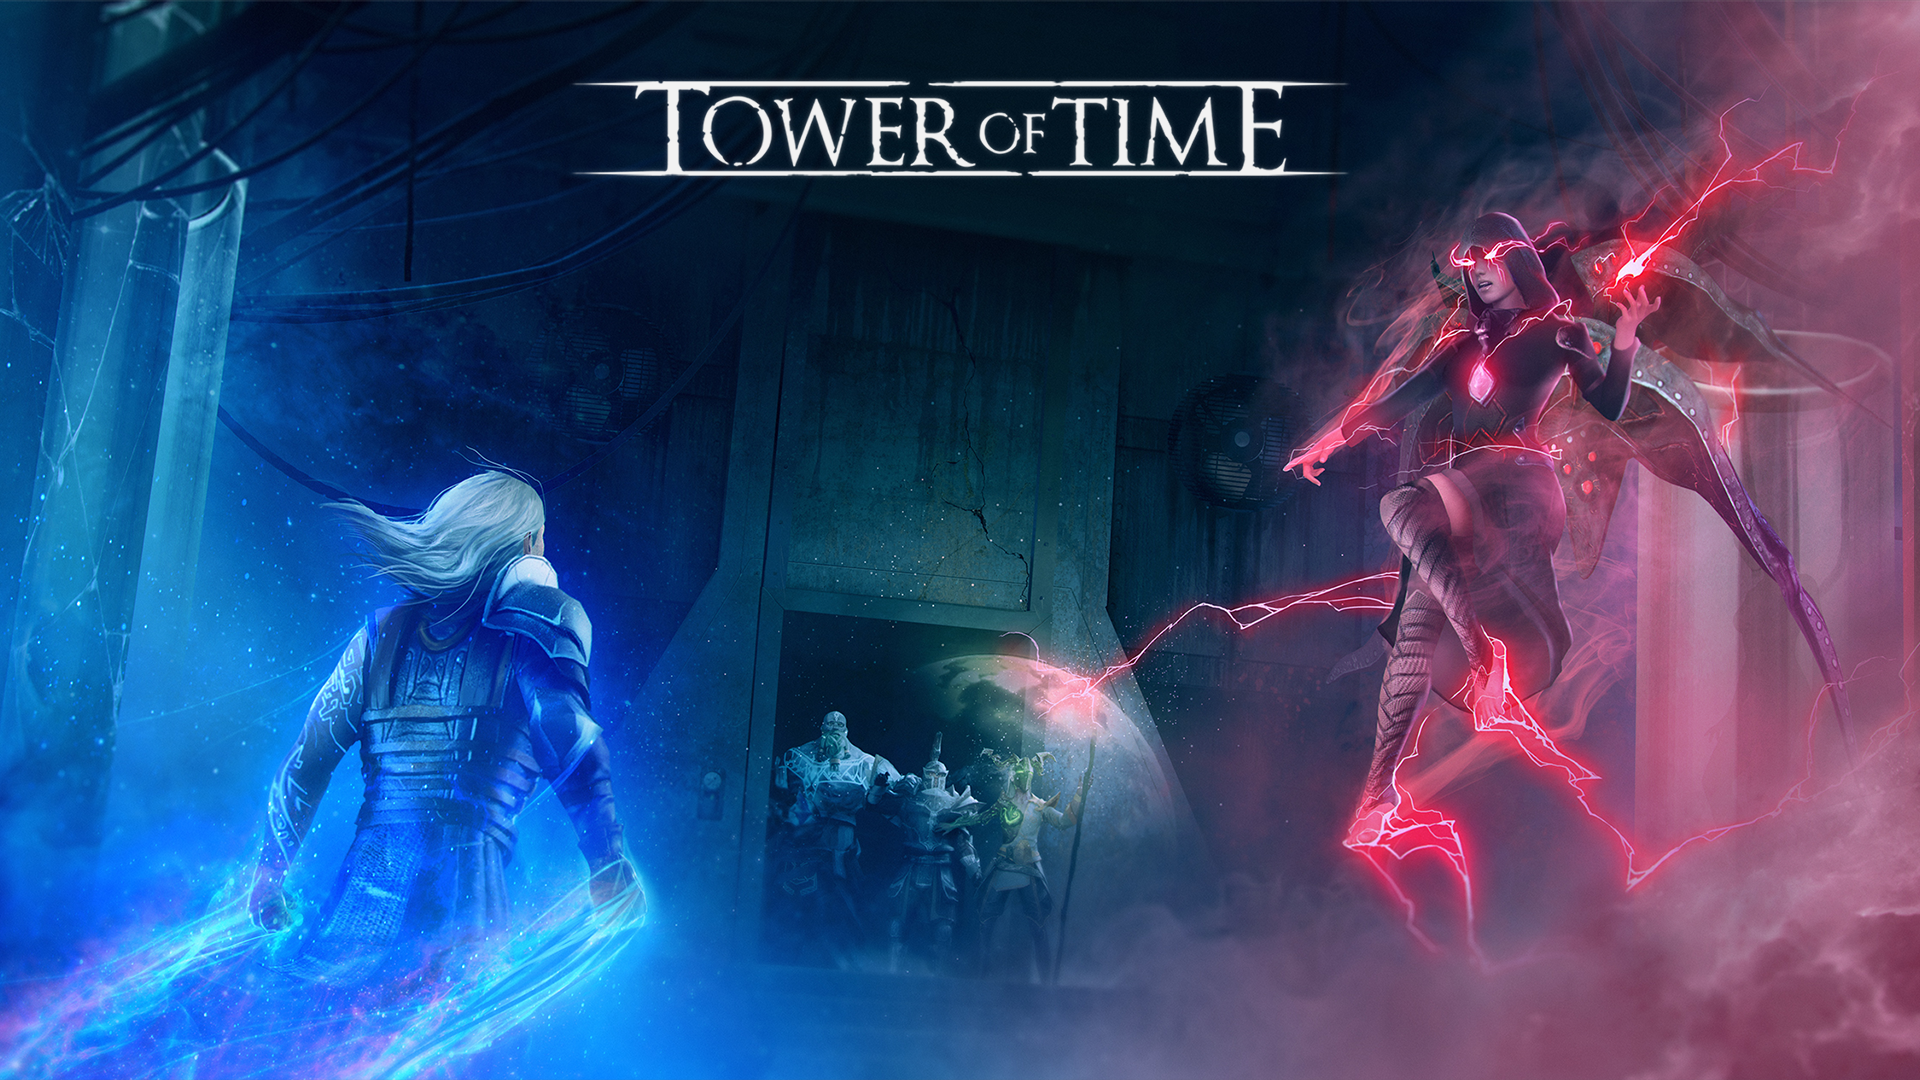 Tower of Time, a 50+ Hour Action-RPG, Announced for Nintendo Switch